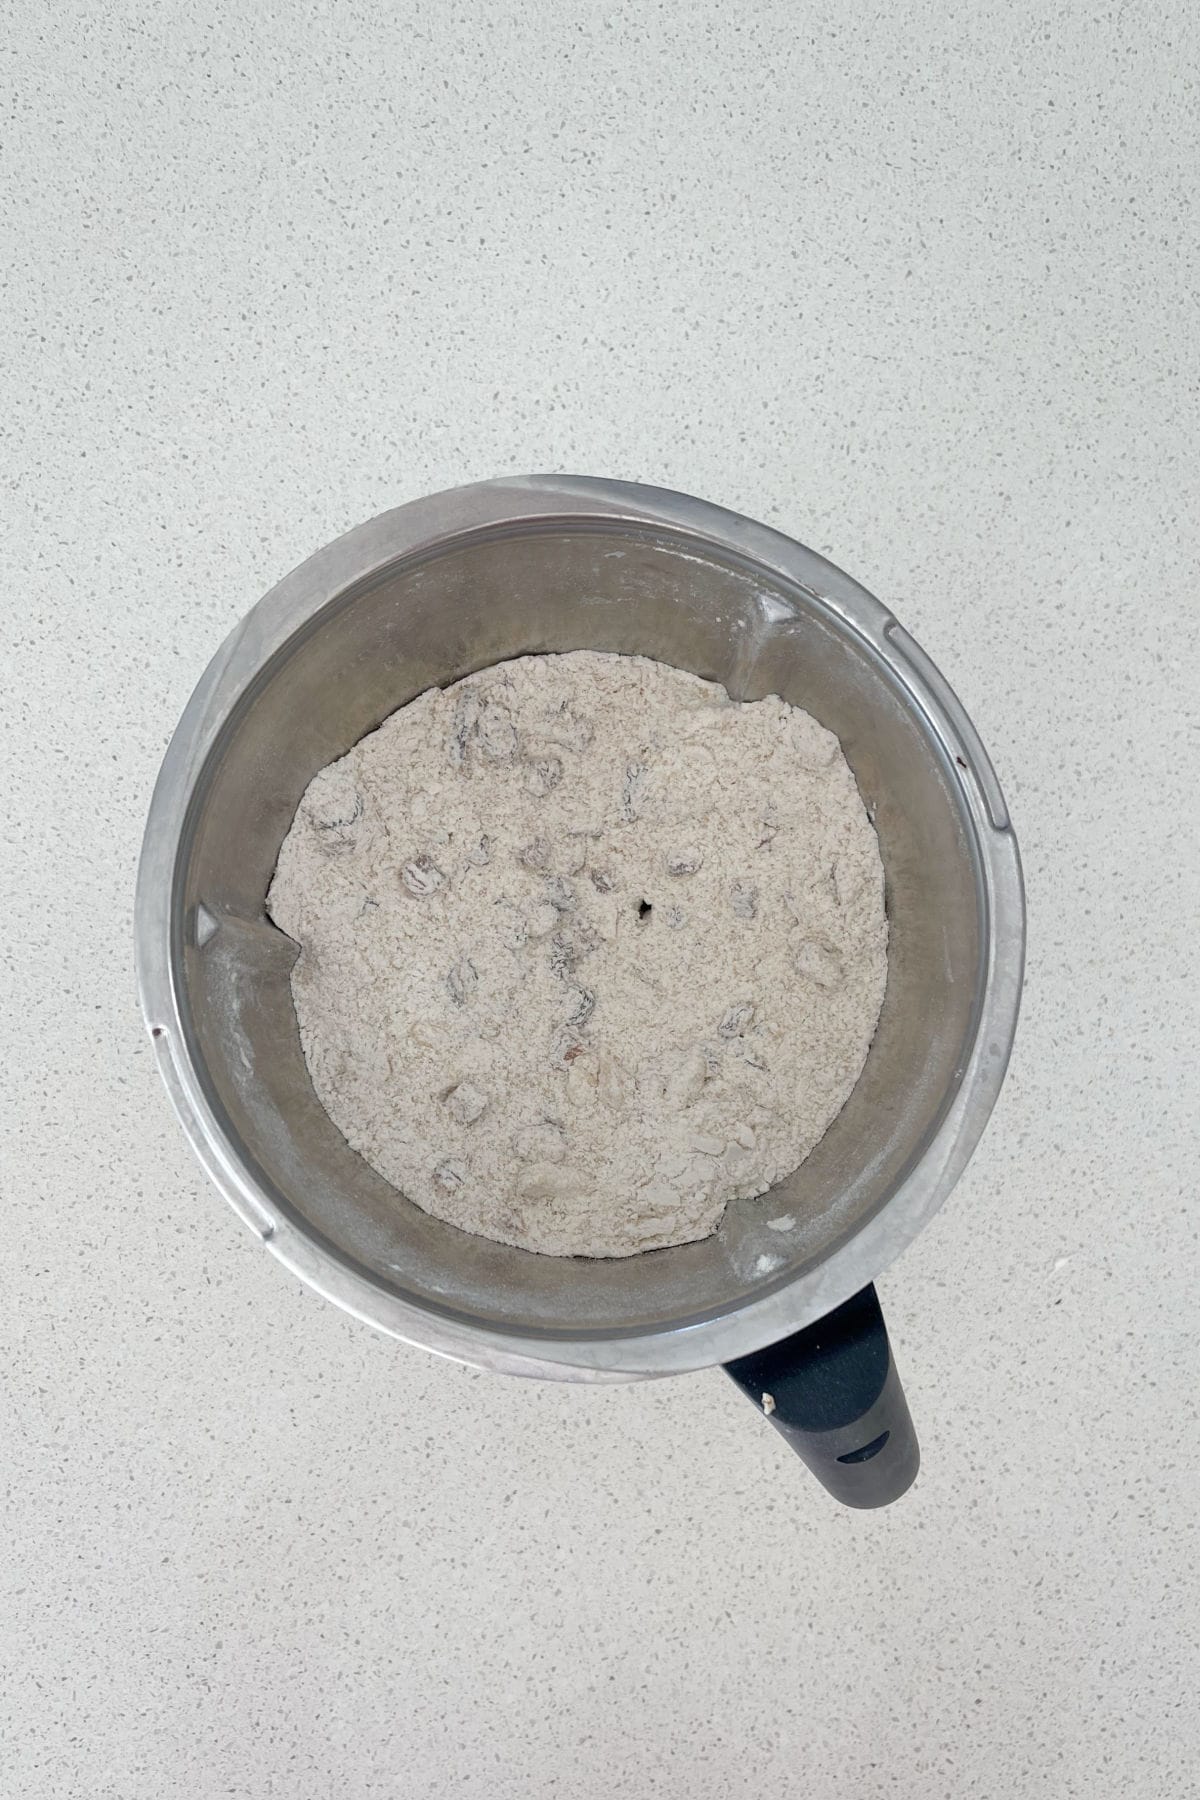 Fruit loaf mixture in a thermomix bowl.